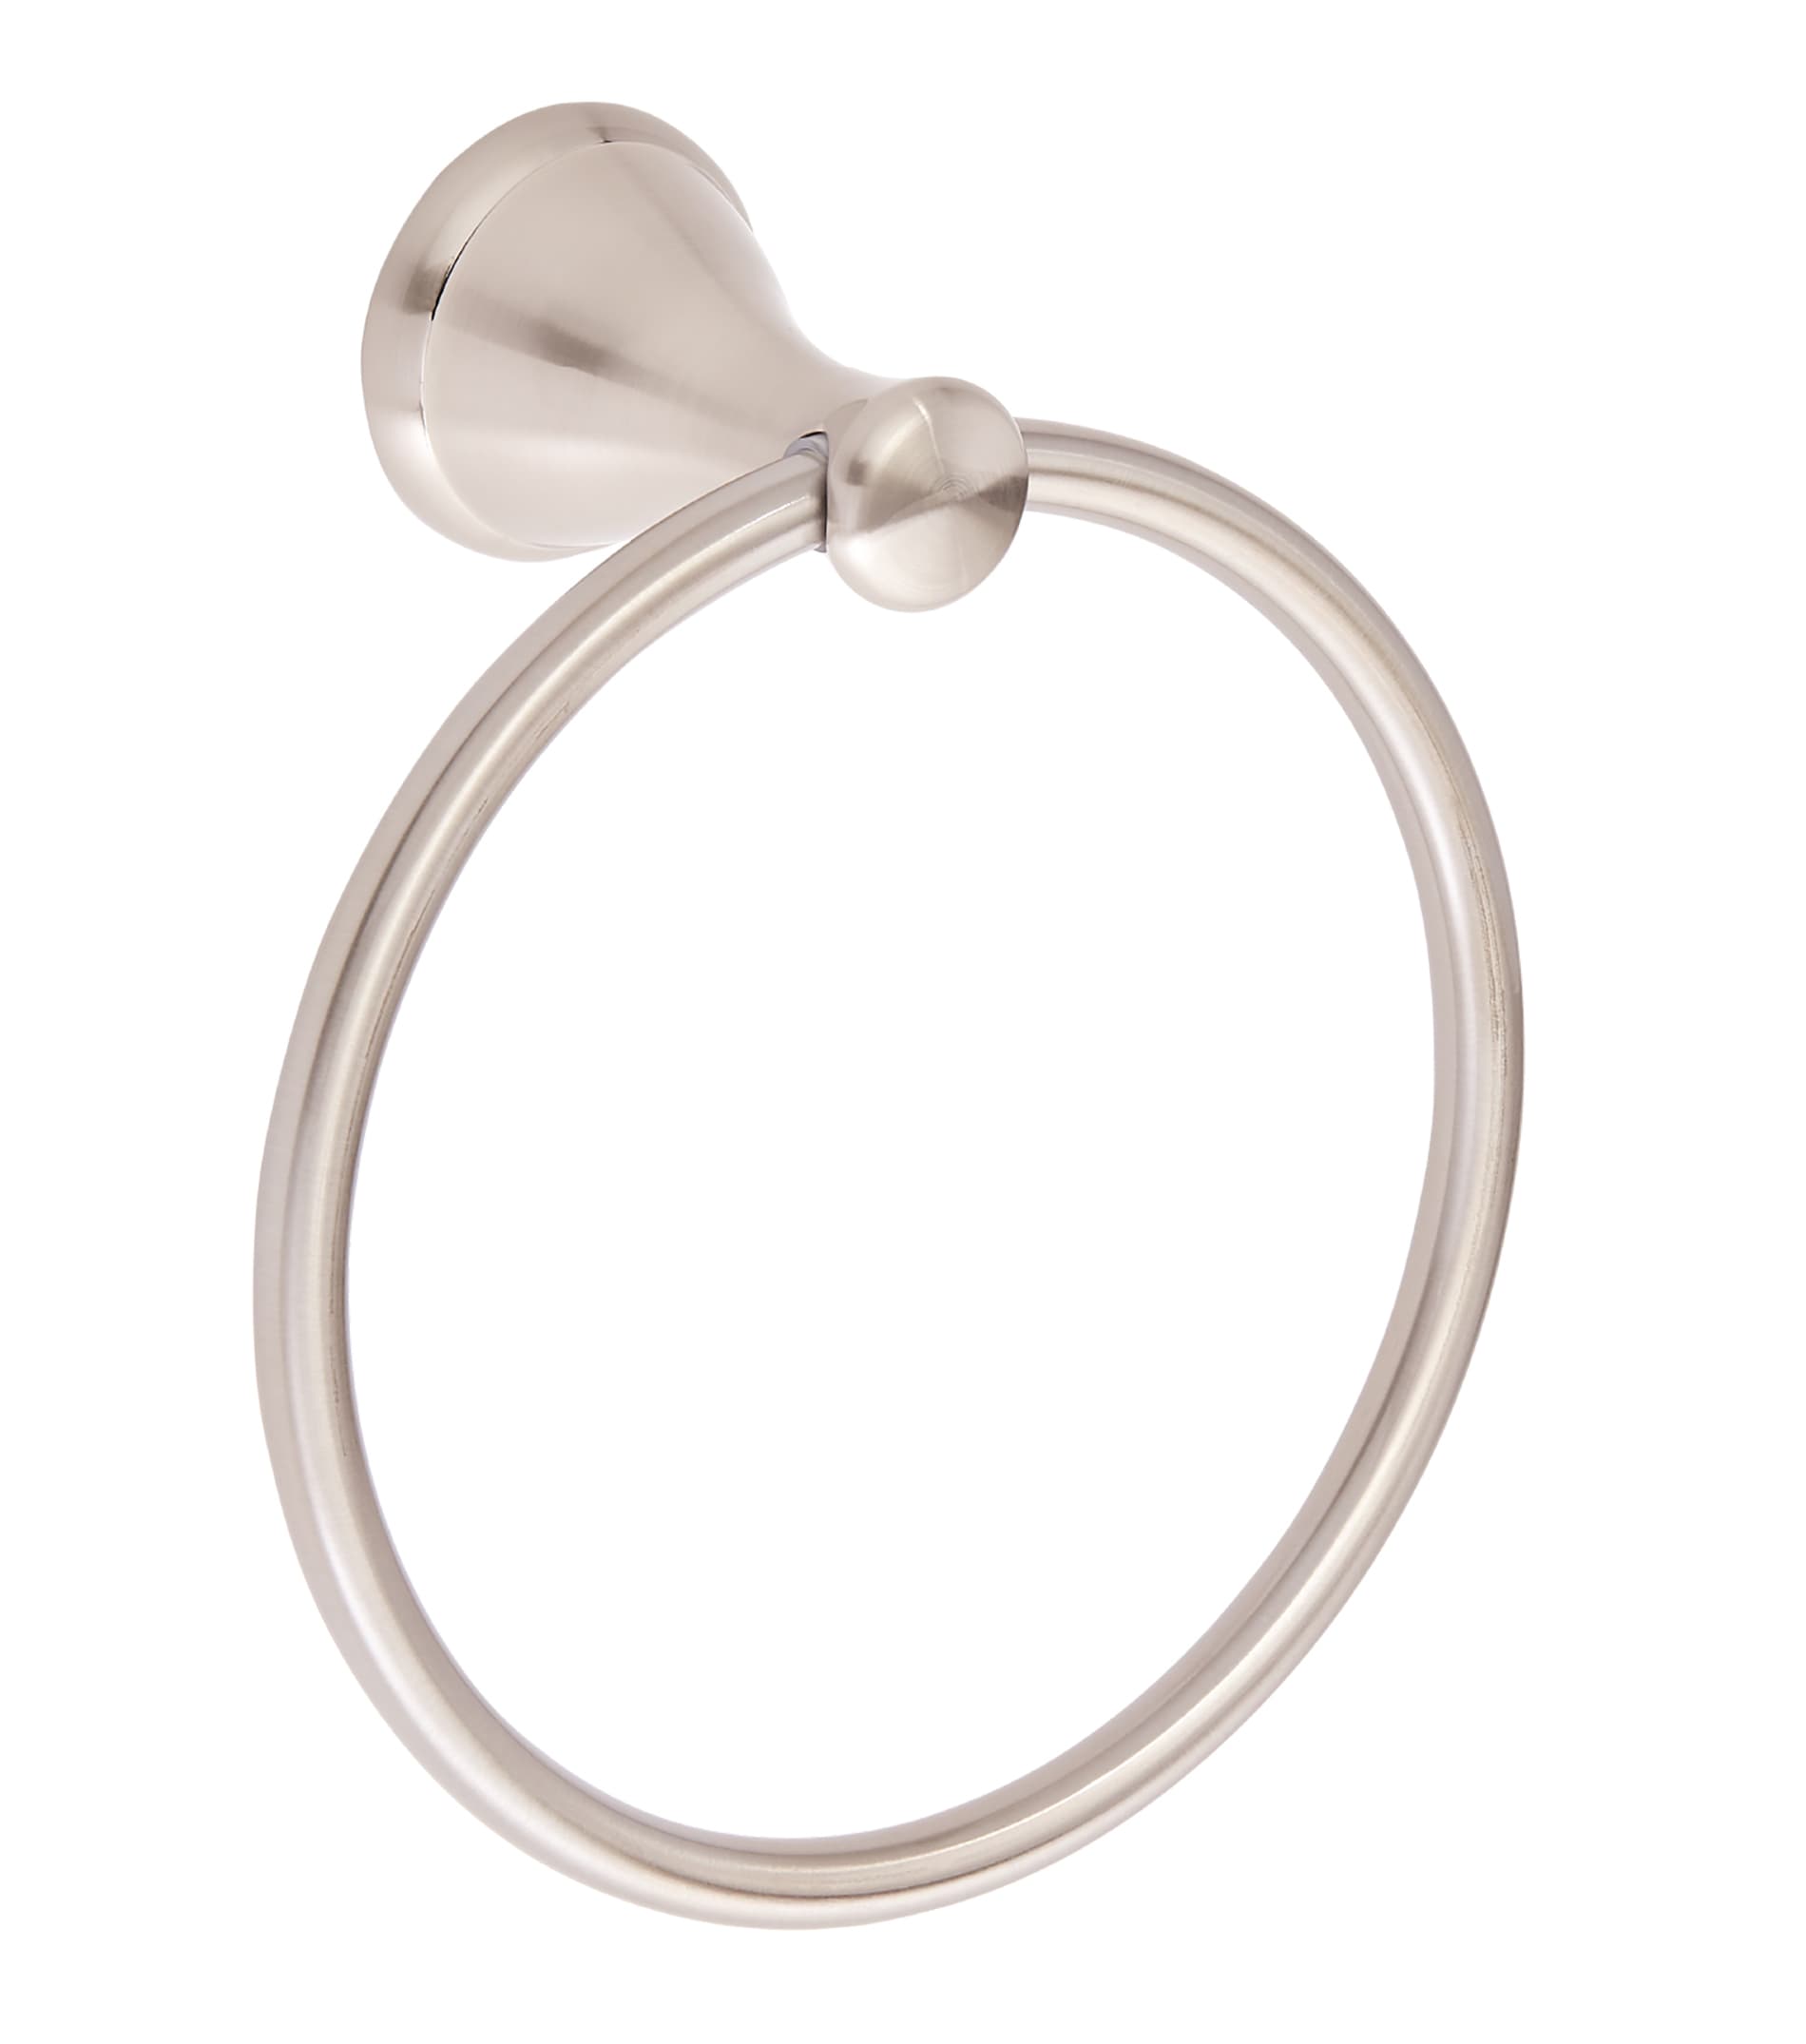 Brushed Nickel Wall Mounted Towel Ring Variety Style Available 